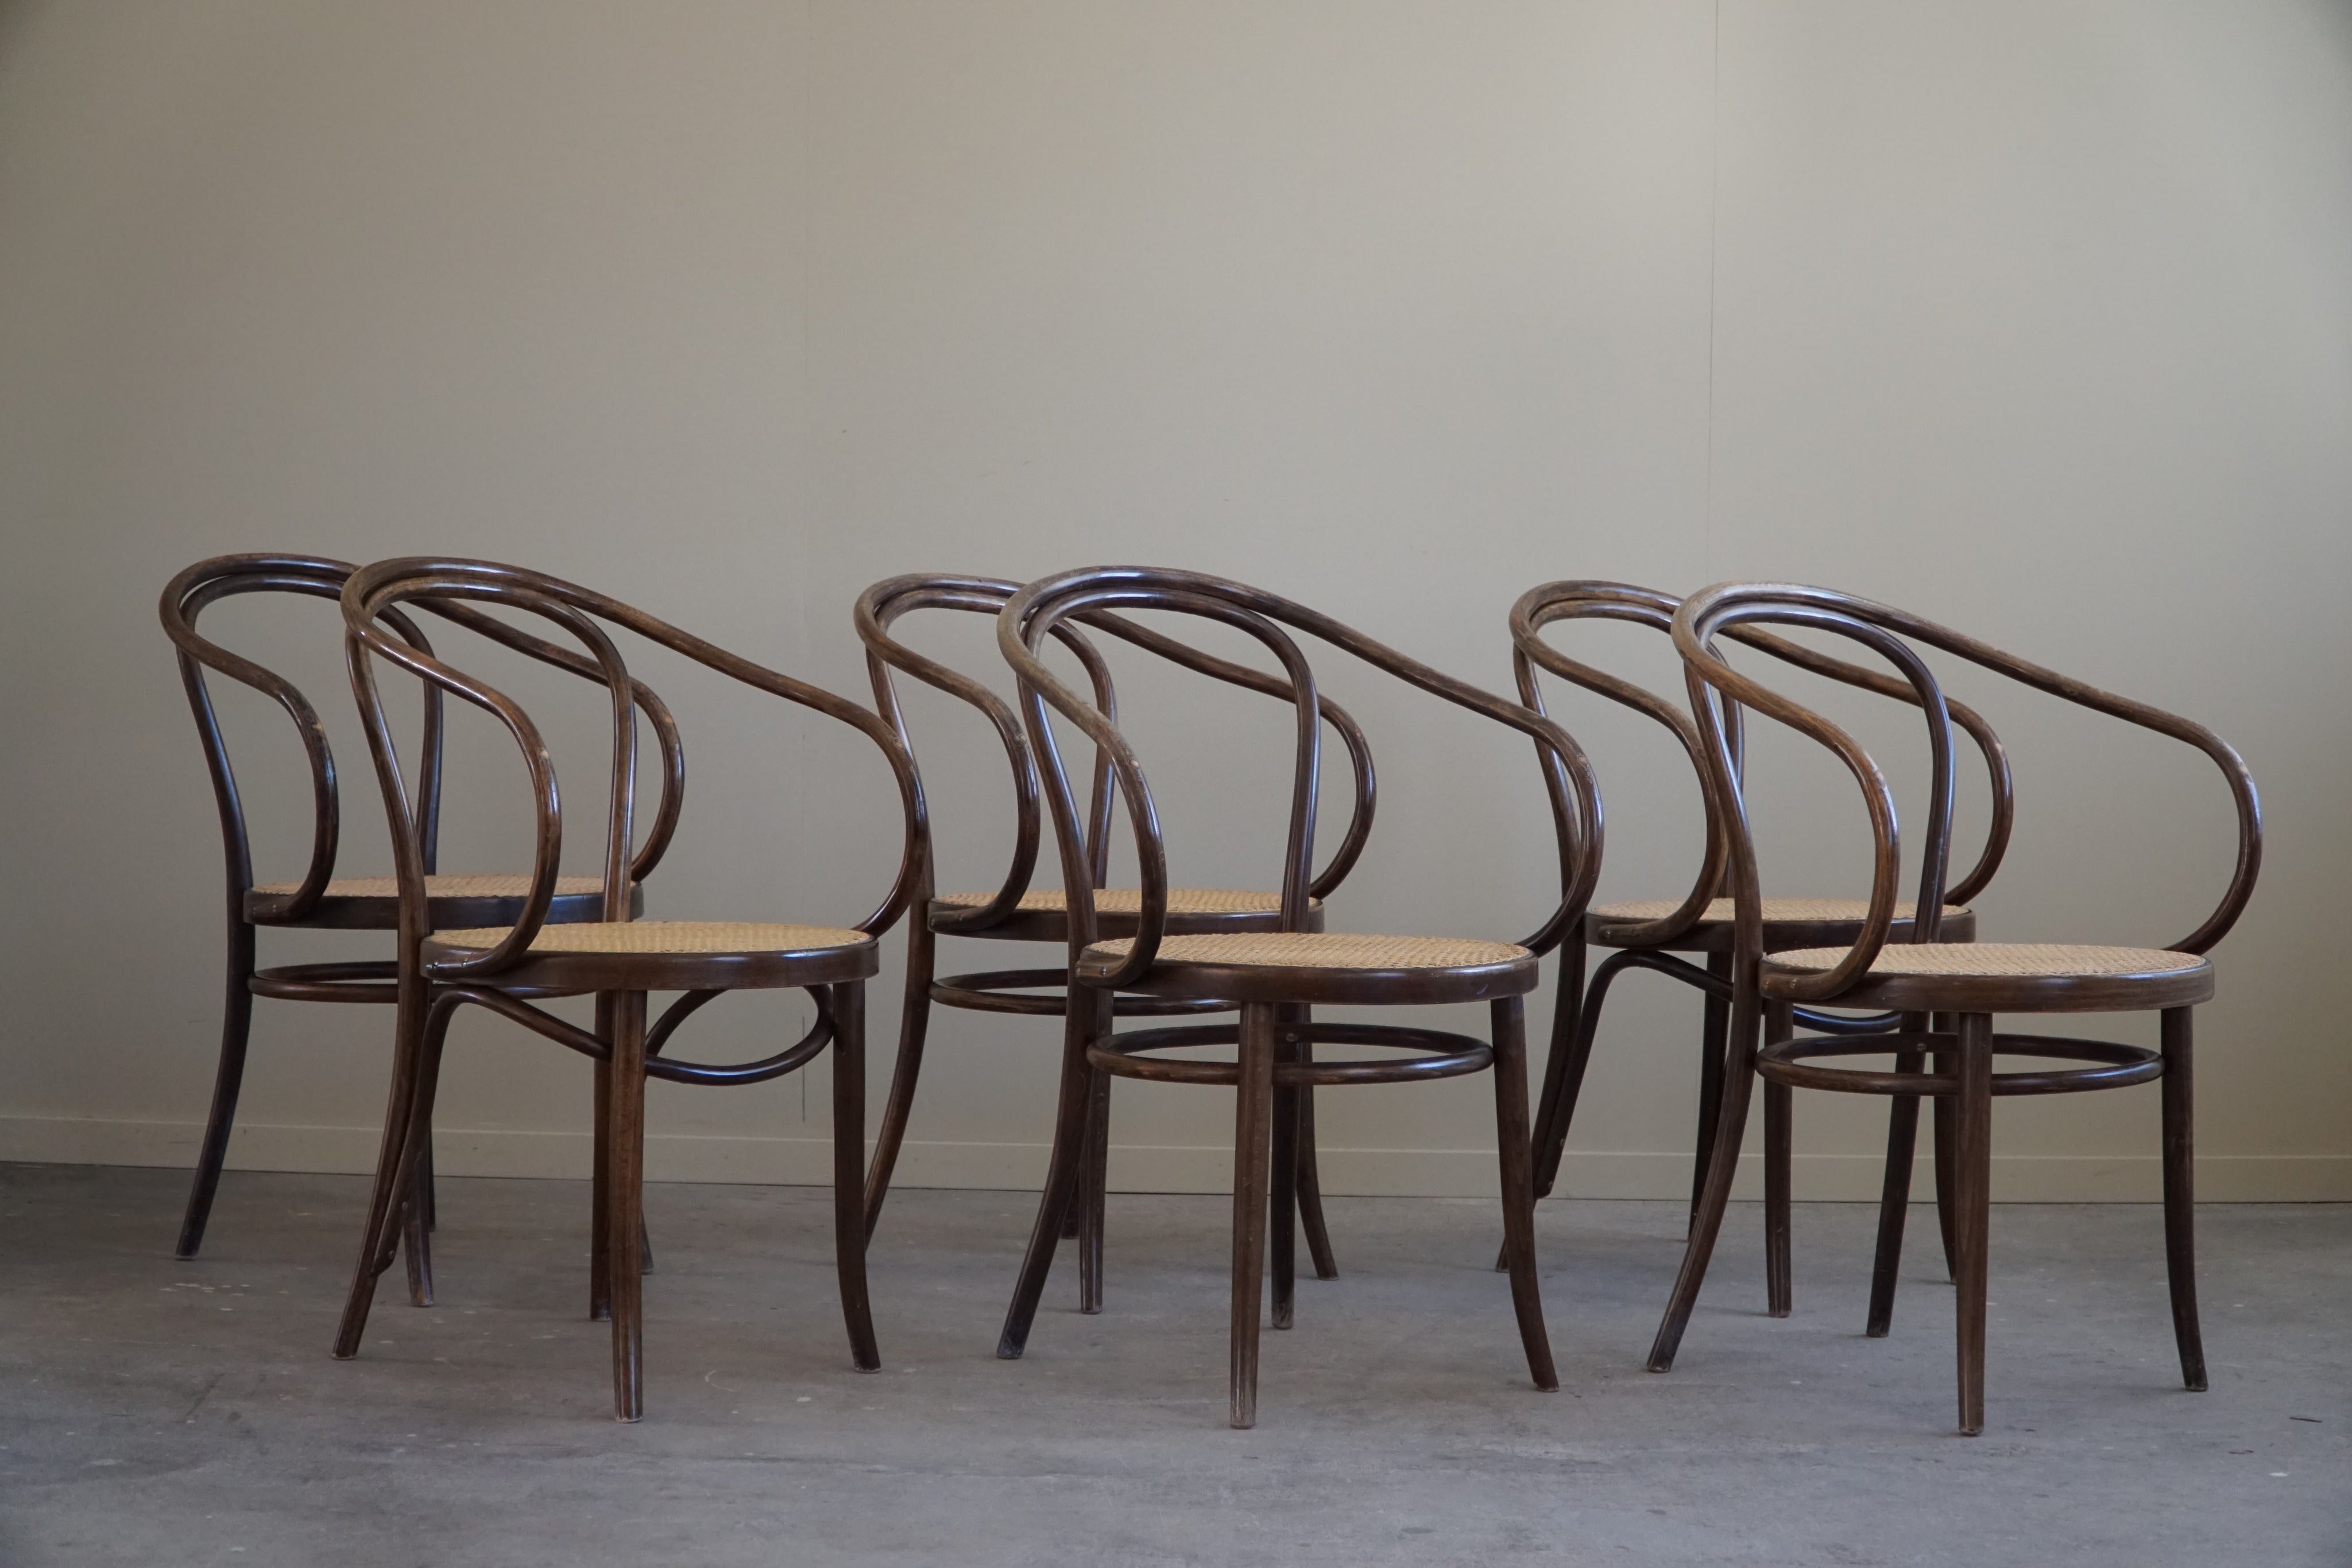 Set of 6 armchairs / dining room chairs designed by Thonet. These chairs were produced at ZPM Radomsko in the 1960s and has an attribution mark such as a manufacturer’s label. The design of this Bentwood armchair dates from 1900. This chair was a